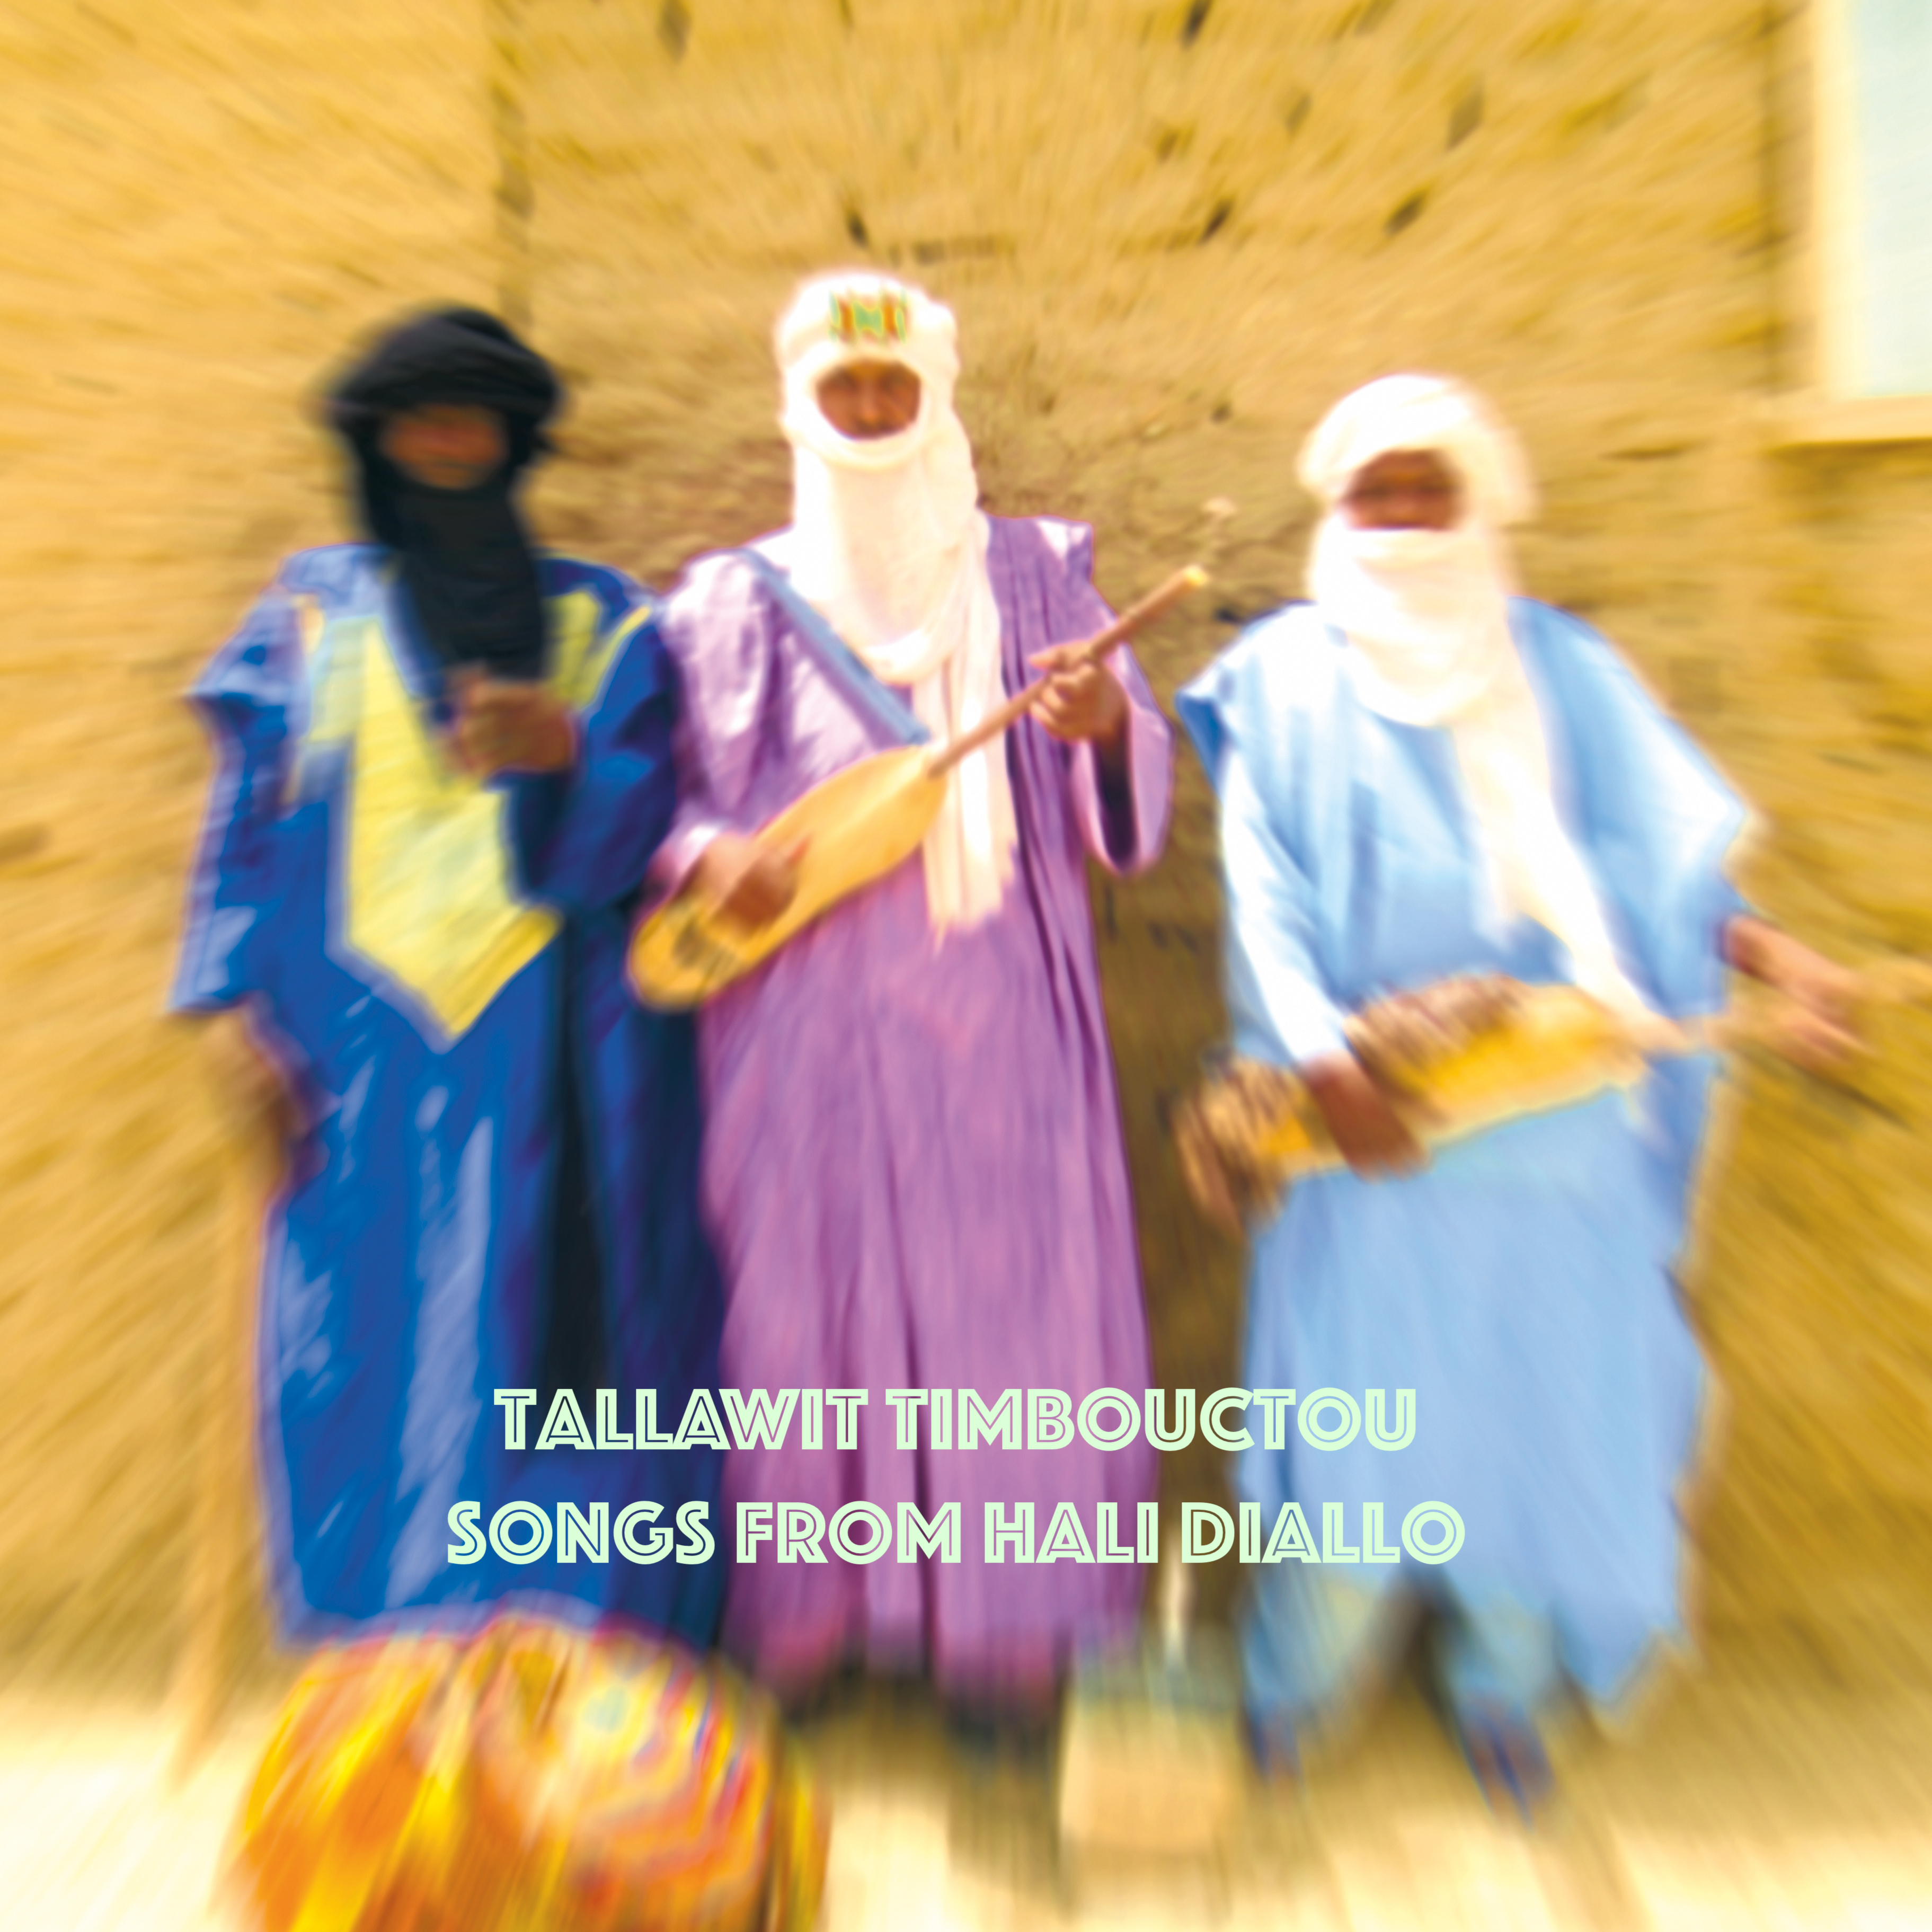 Tallawit Timbouctou – Songs from their Album Hali Diallo